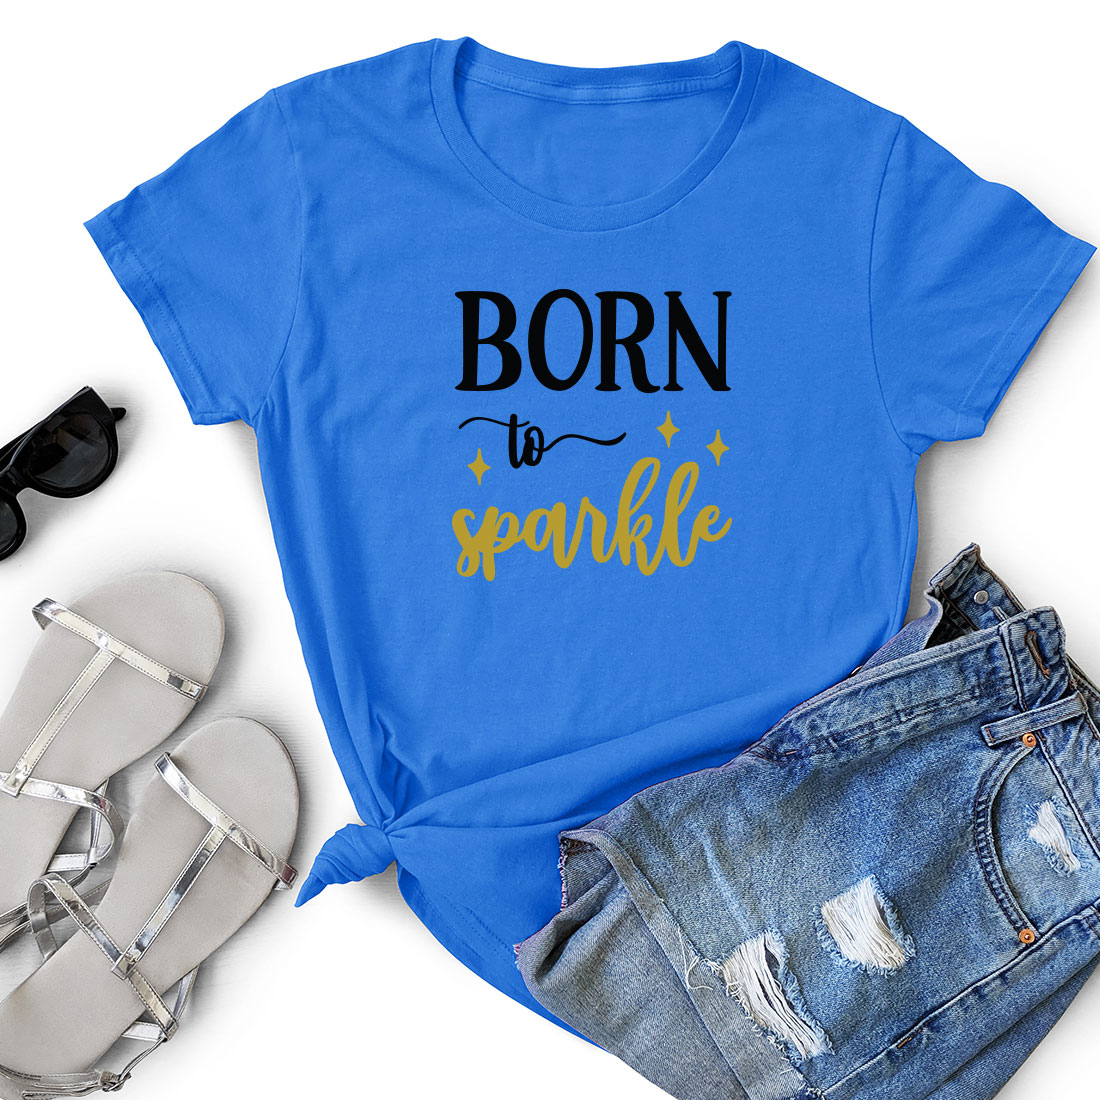 T - shirt that says born to sparkle next to a pair of shorts.